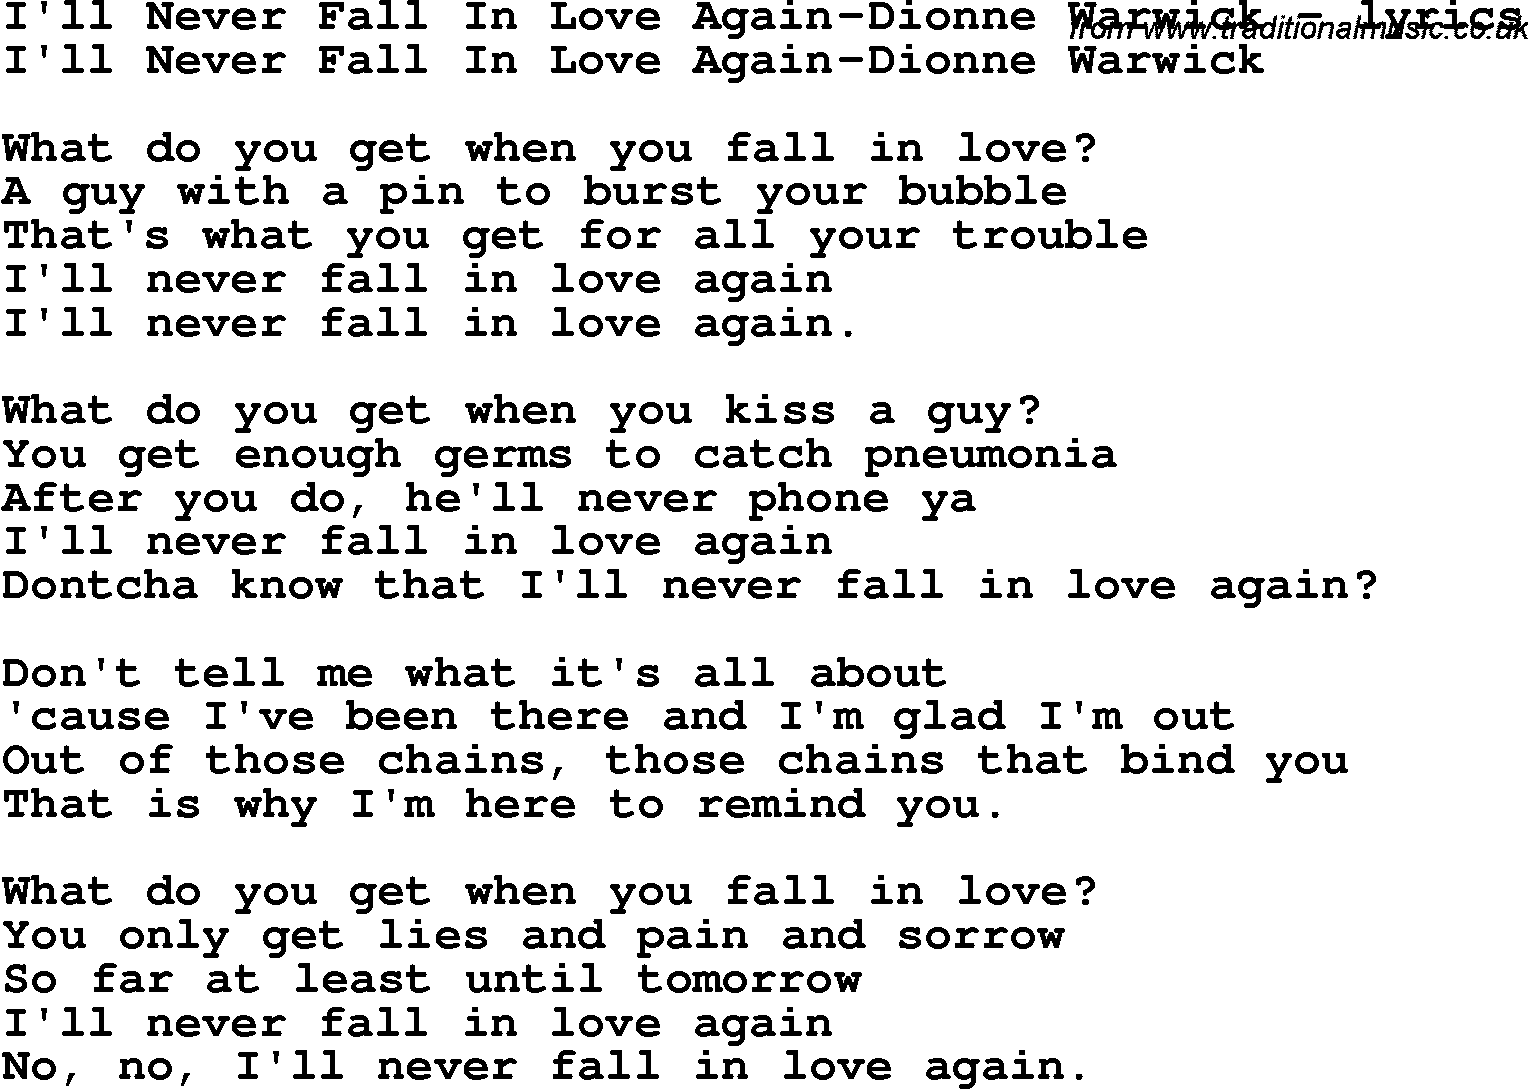 Love Song Lyrics for: I'll Never Fall In Love Again-Dionne Warwick